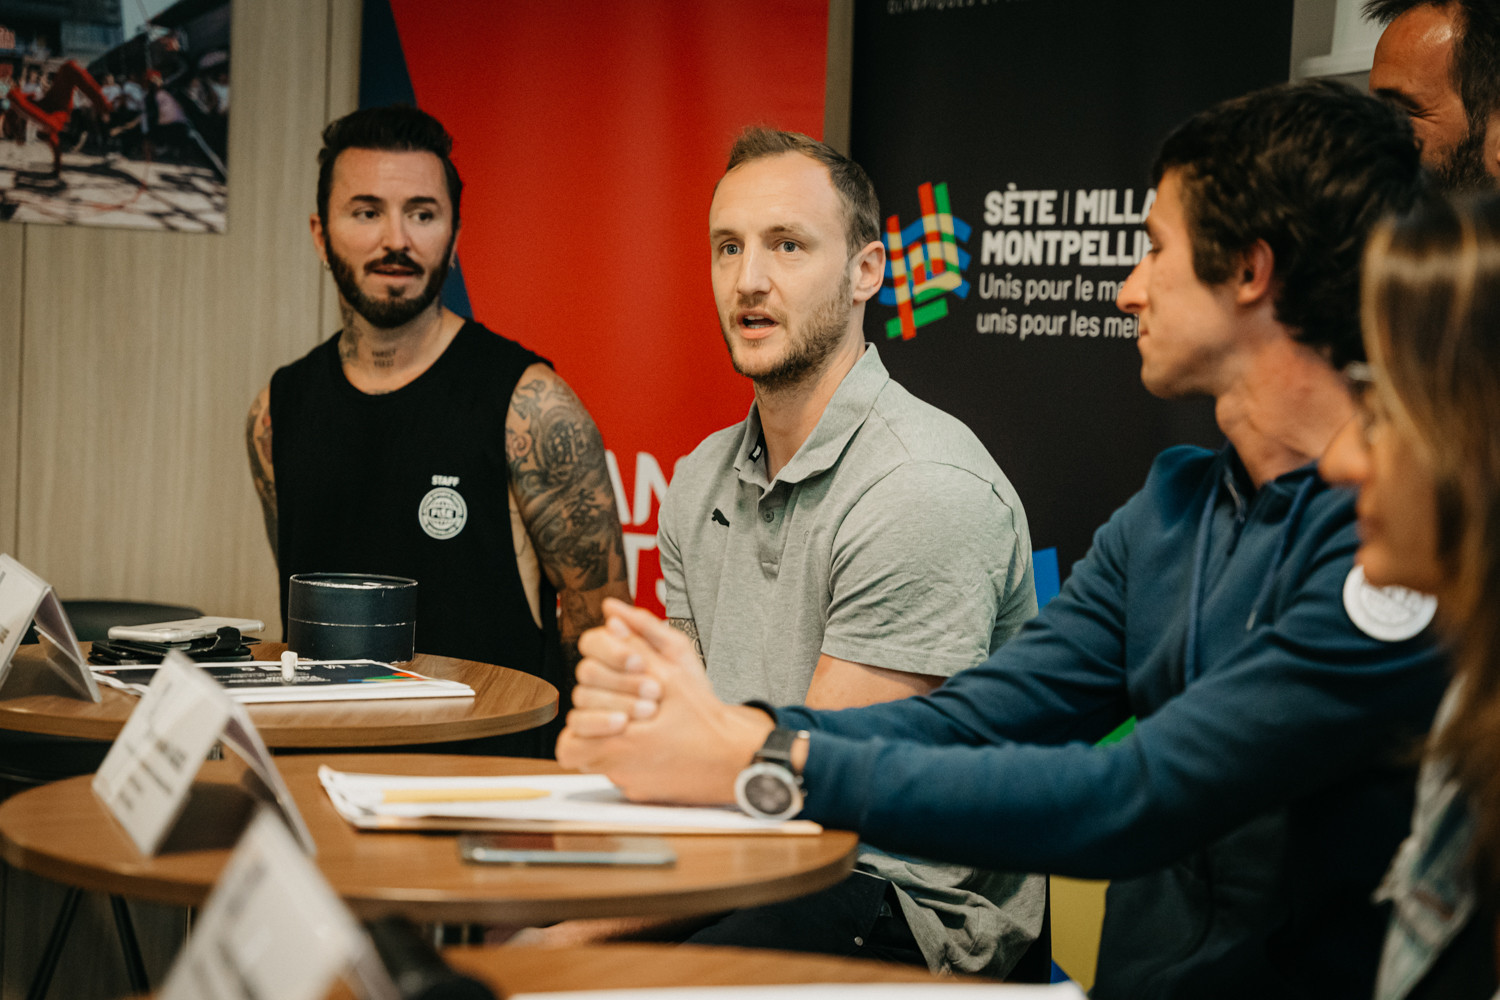 Handball player Valentin Porte, centre, insists Montpellier's high-quality facilities can propel the French team to gold at Paris 2024 if they are able to train there ©Hurricane - FISE